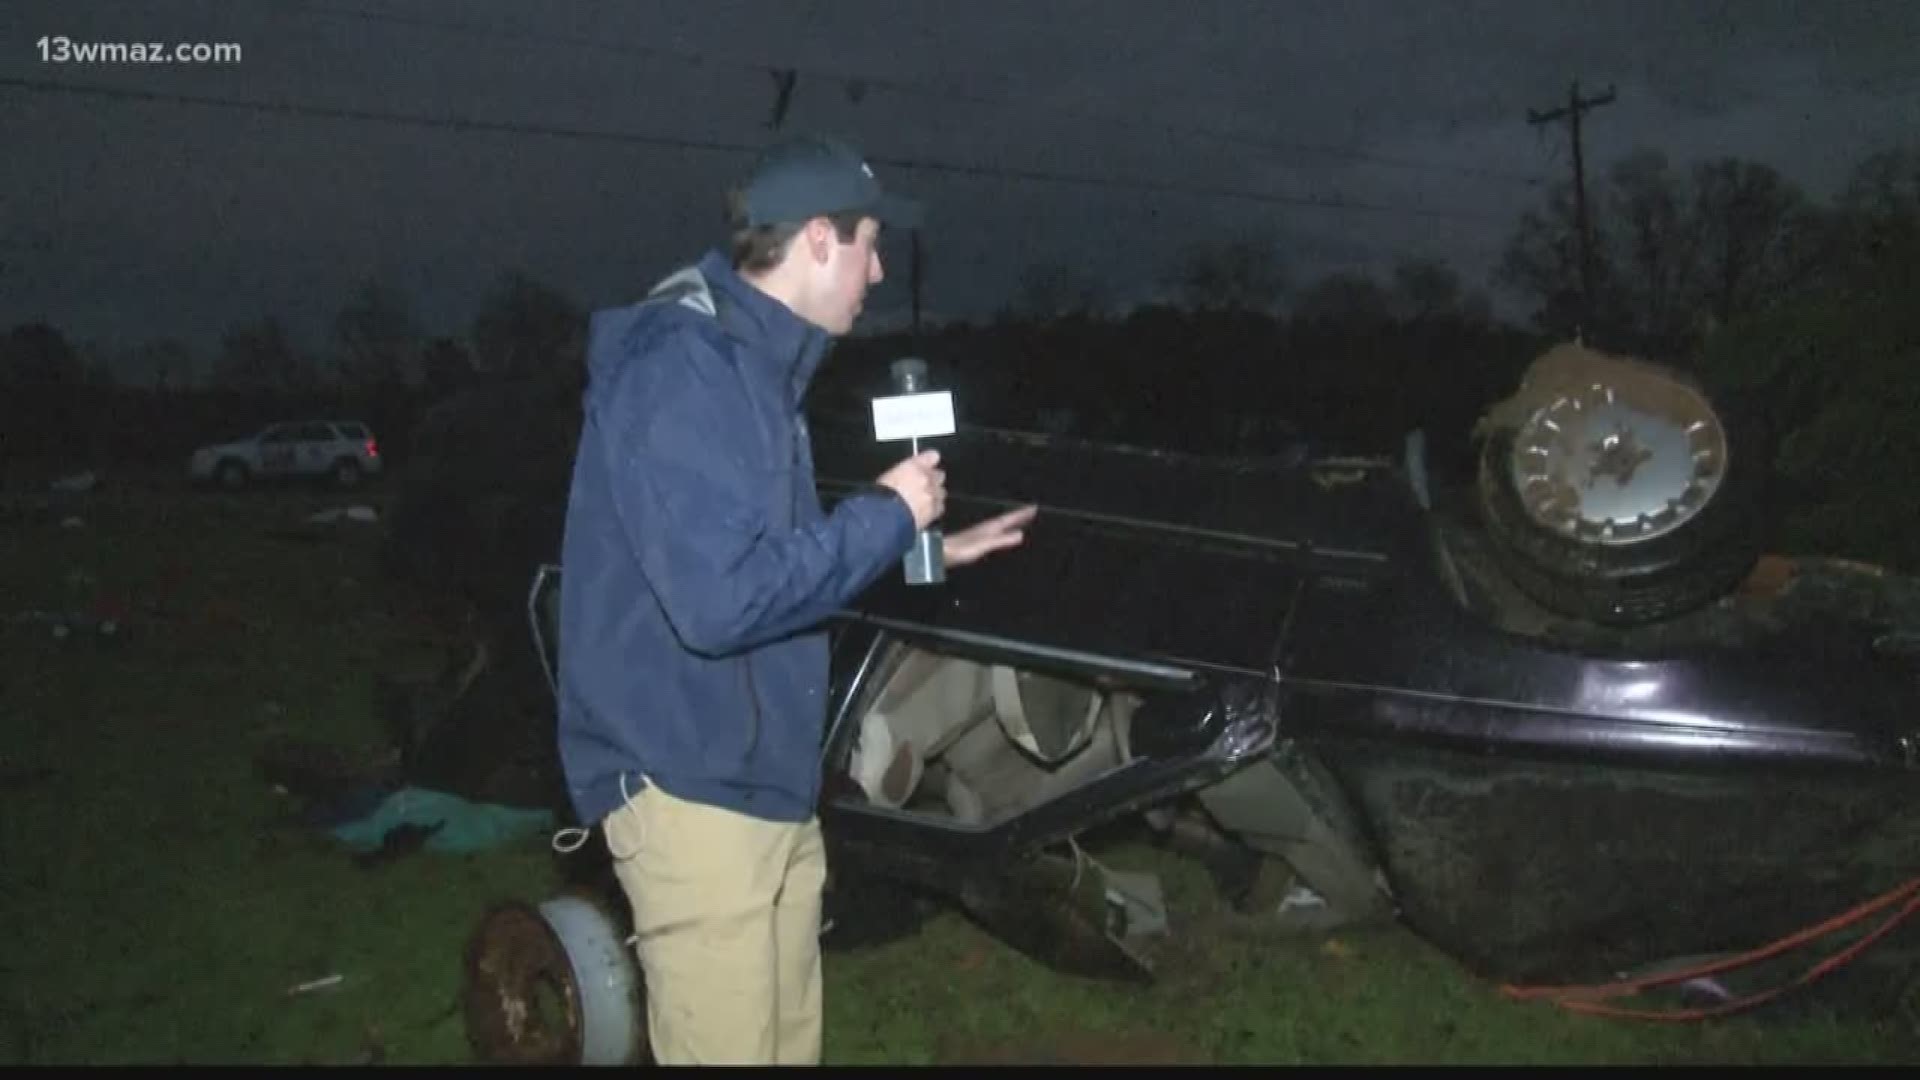 Storm damages properties near the Peach-Crawford County line. Peach County Sheriff Terry Deese says a woman was in the home when the storm came through, and she broke her leg.